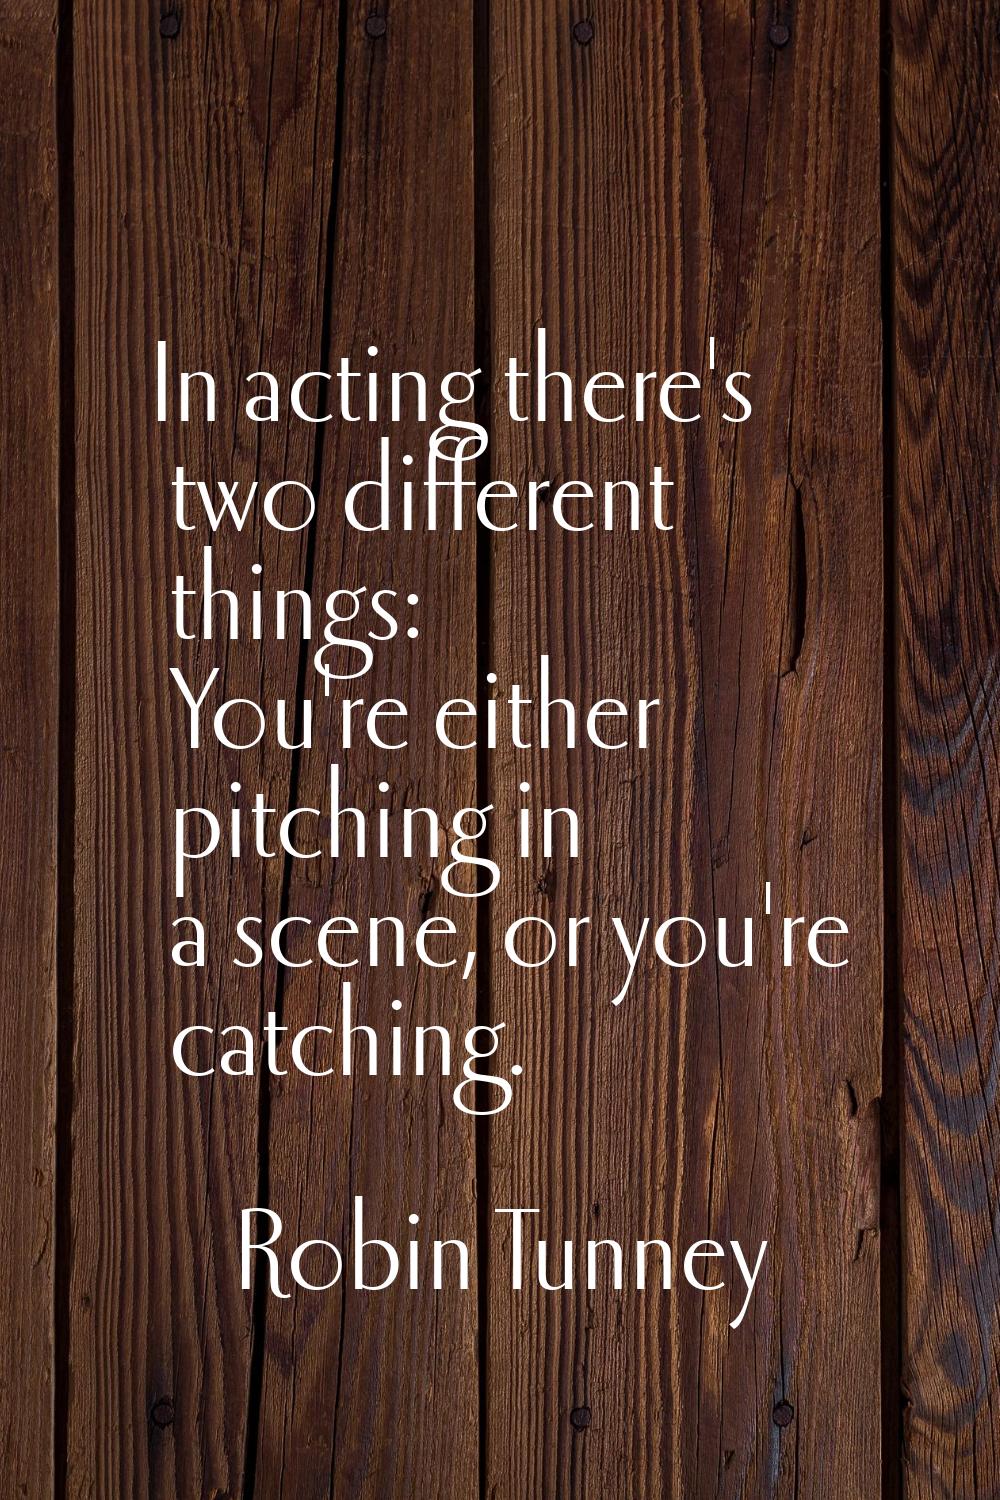 In acting there's two different things: You're either pitching in a scene, or you're catching.